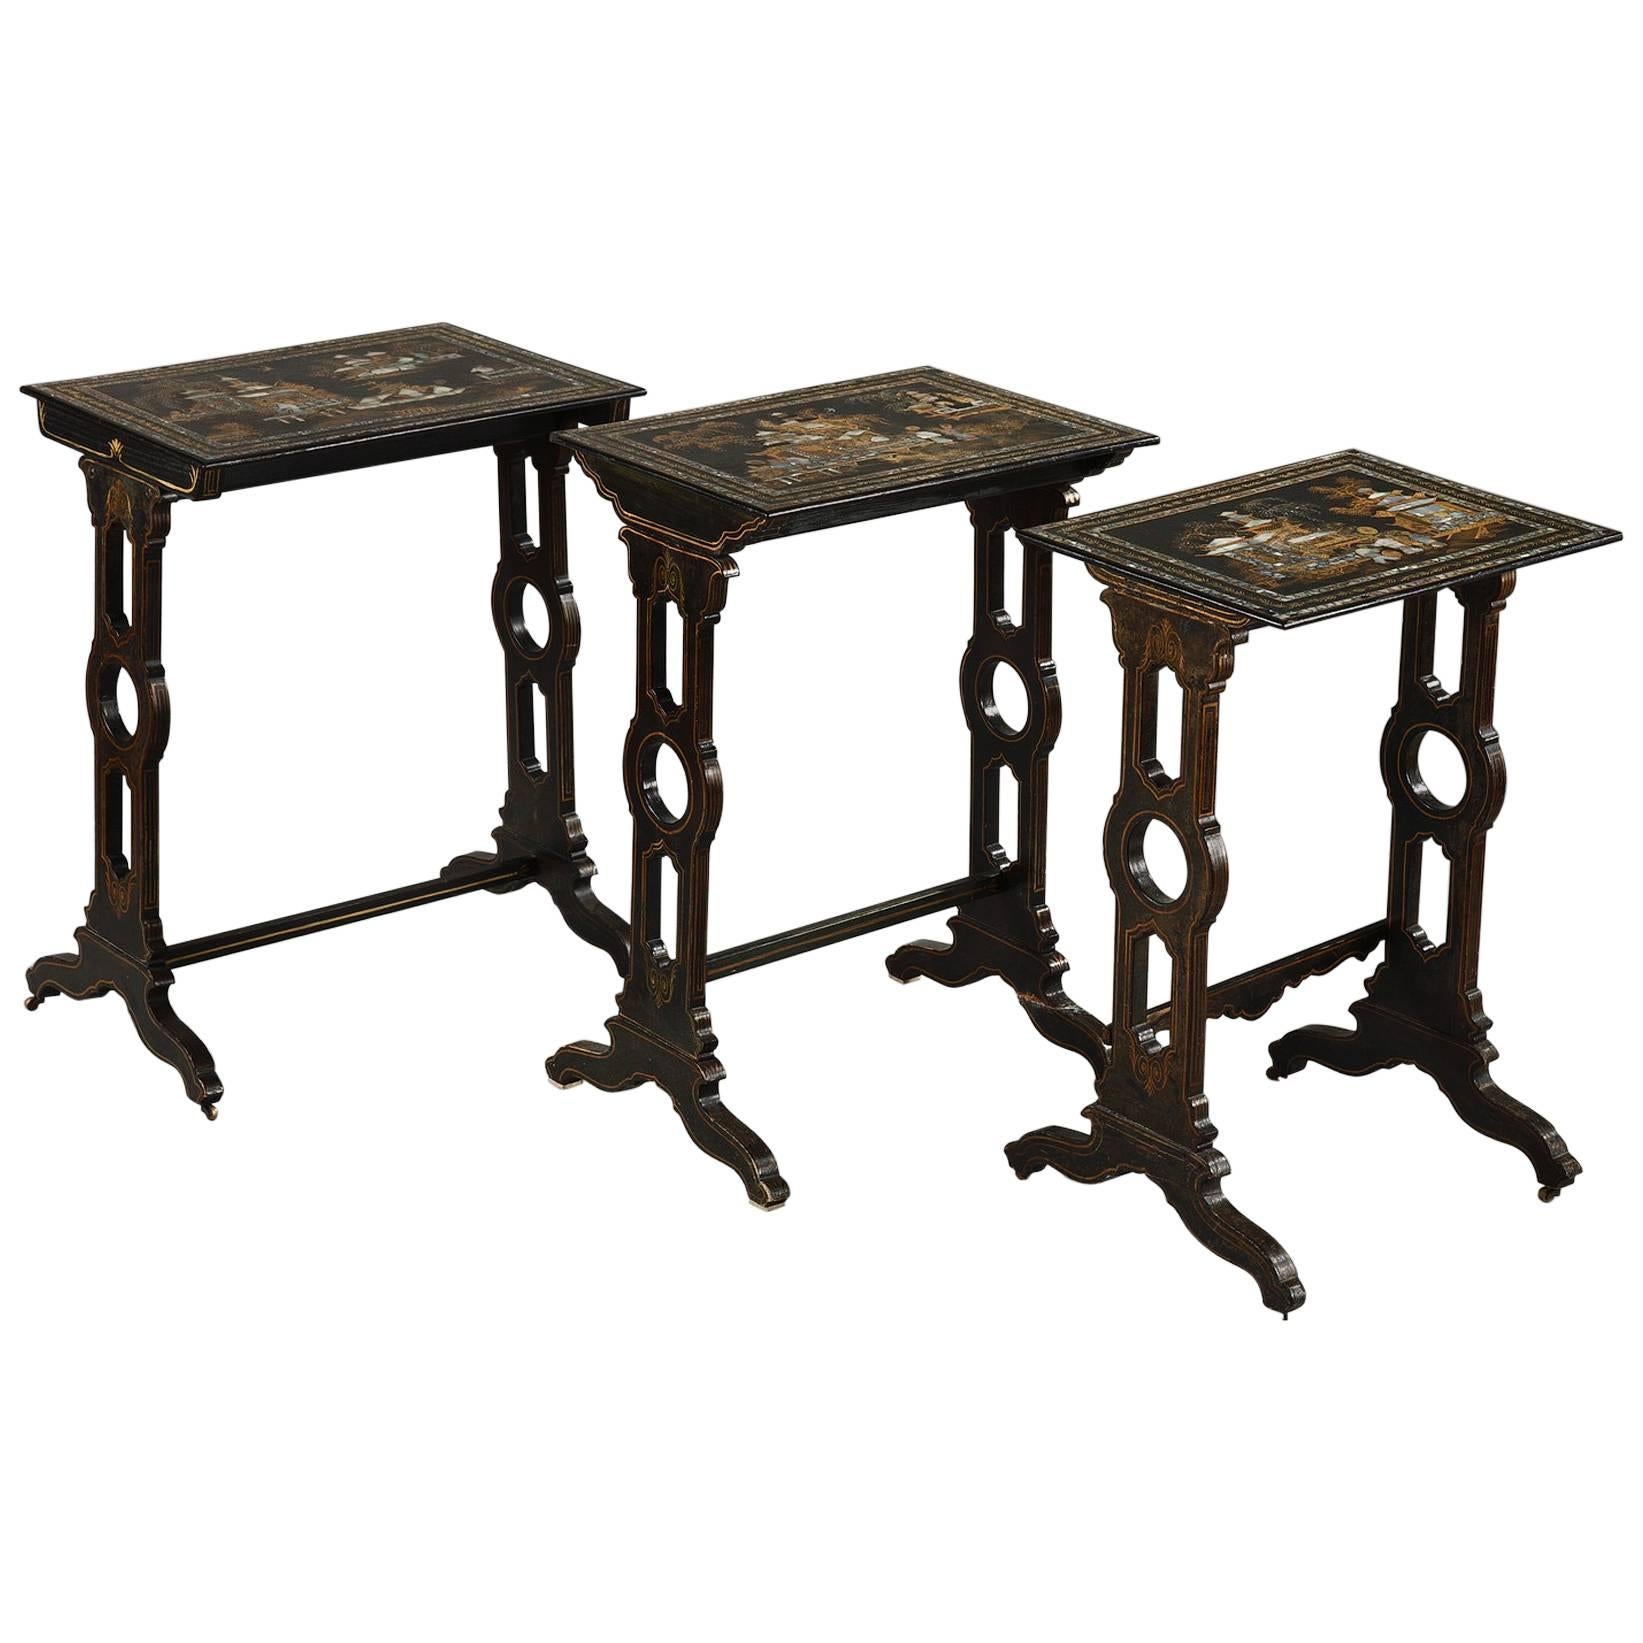 Three Tables with Lacquered Motifs of the Far East, 19th Century, Napoleon III